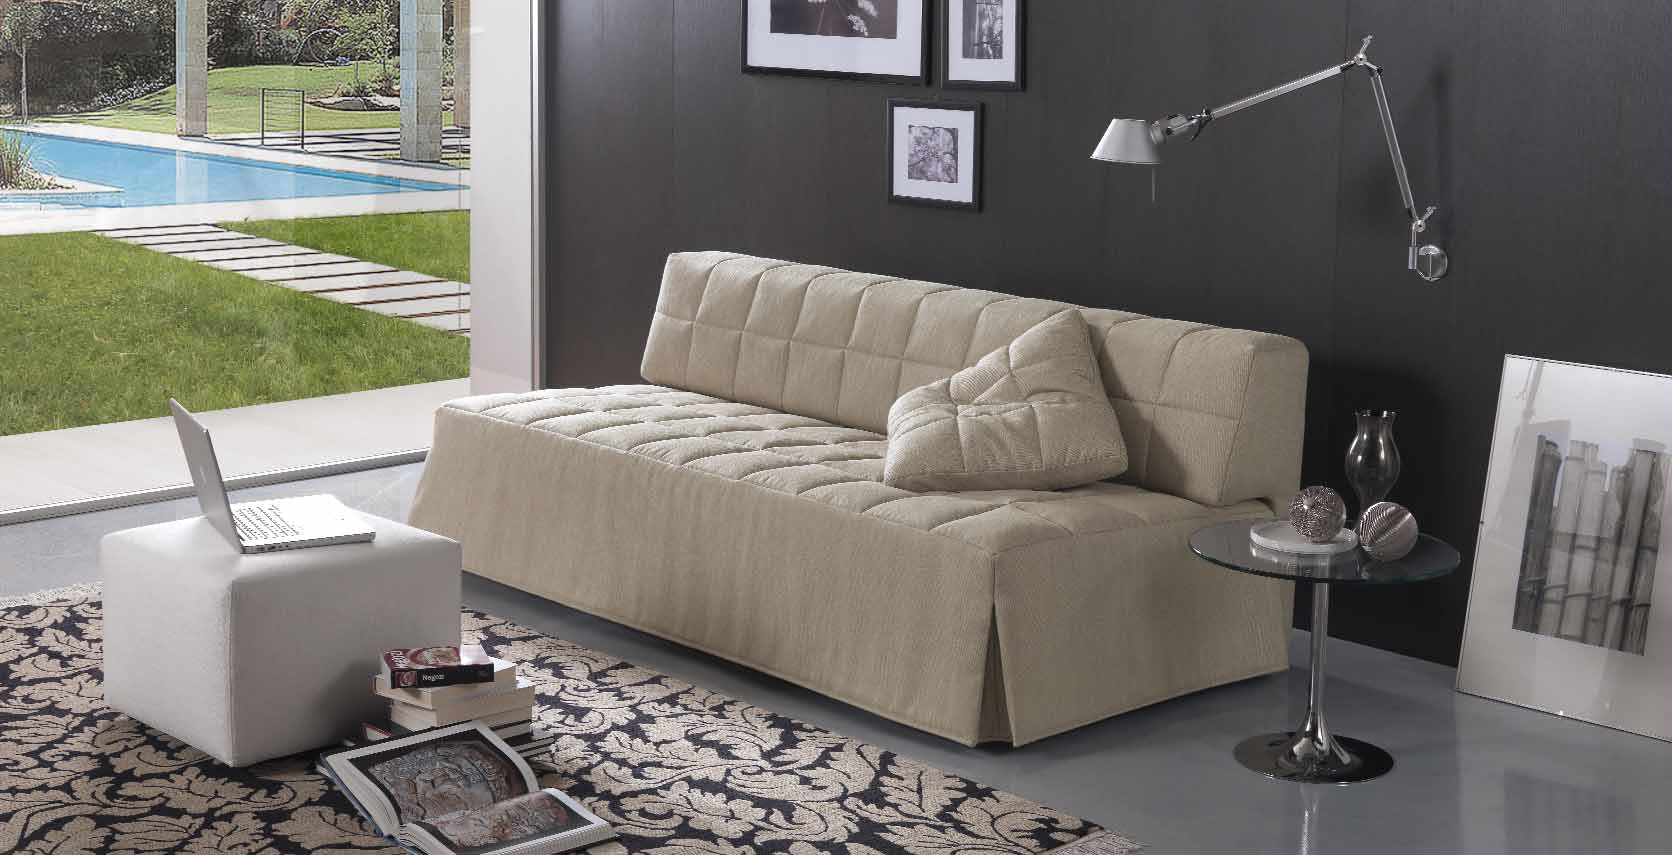 The sofa easily becomes a single bed with a large sleeping surface.